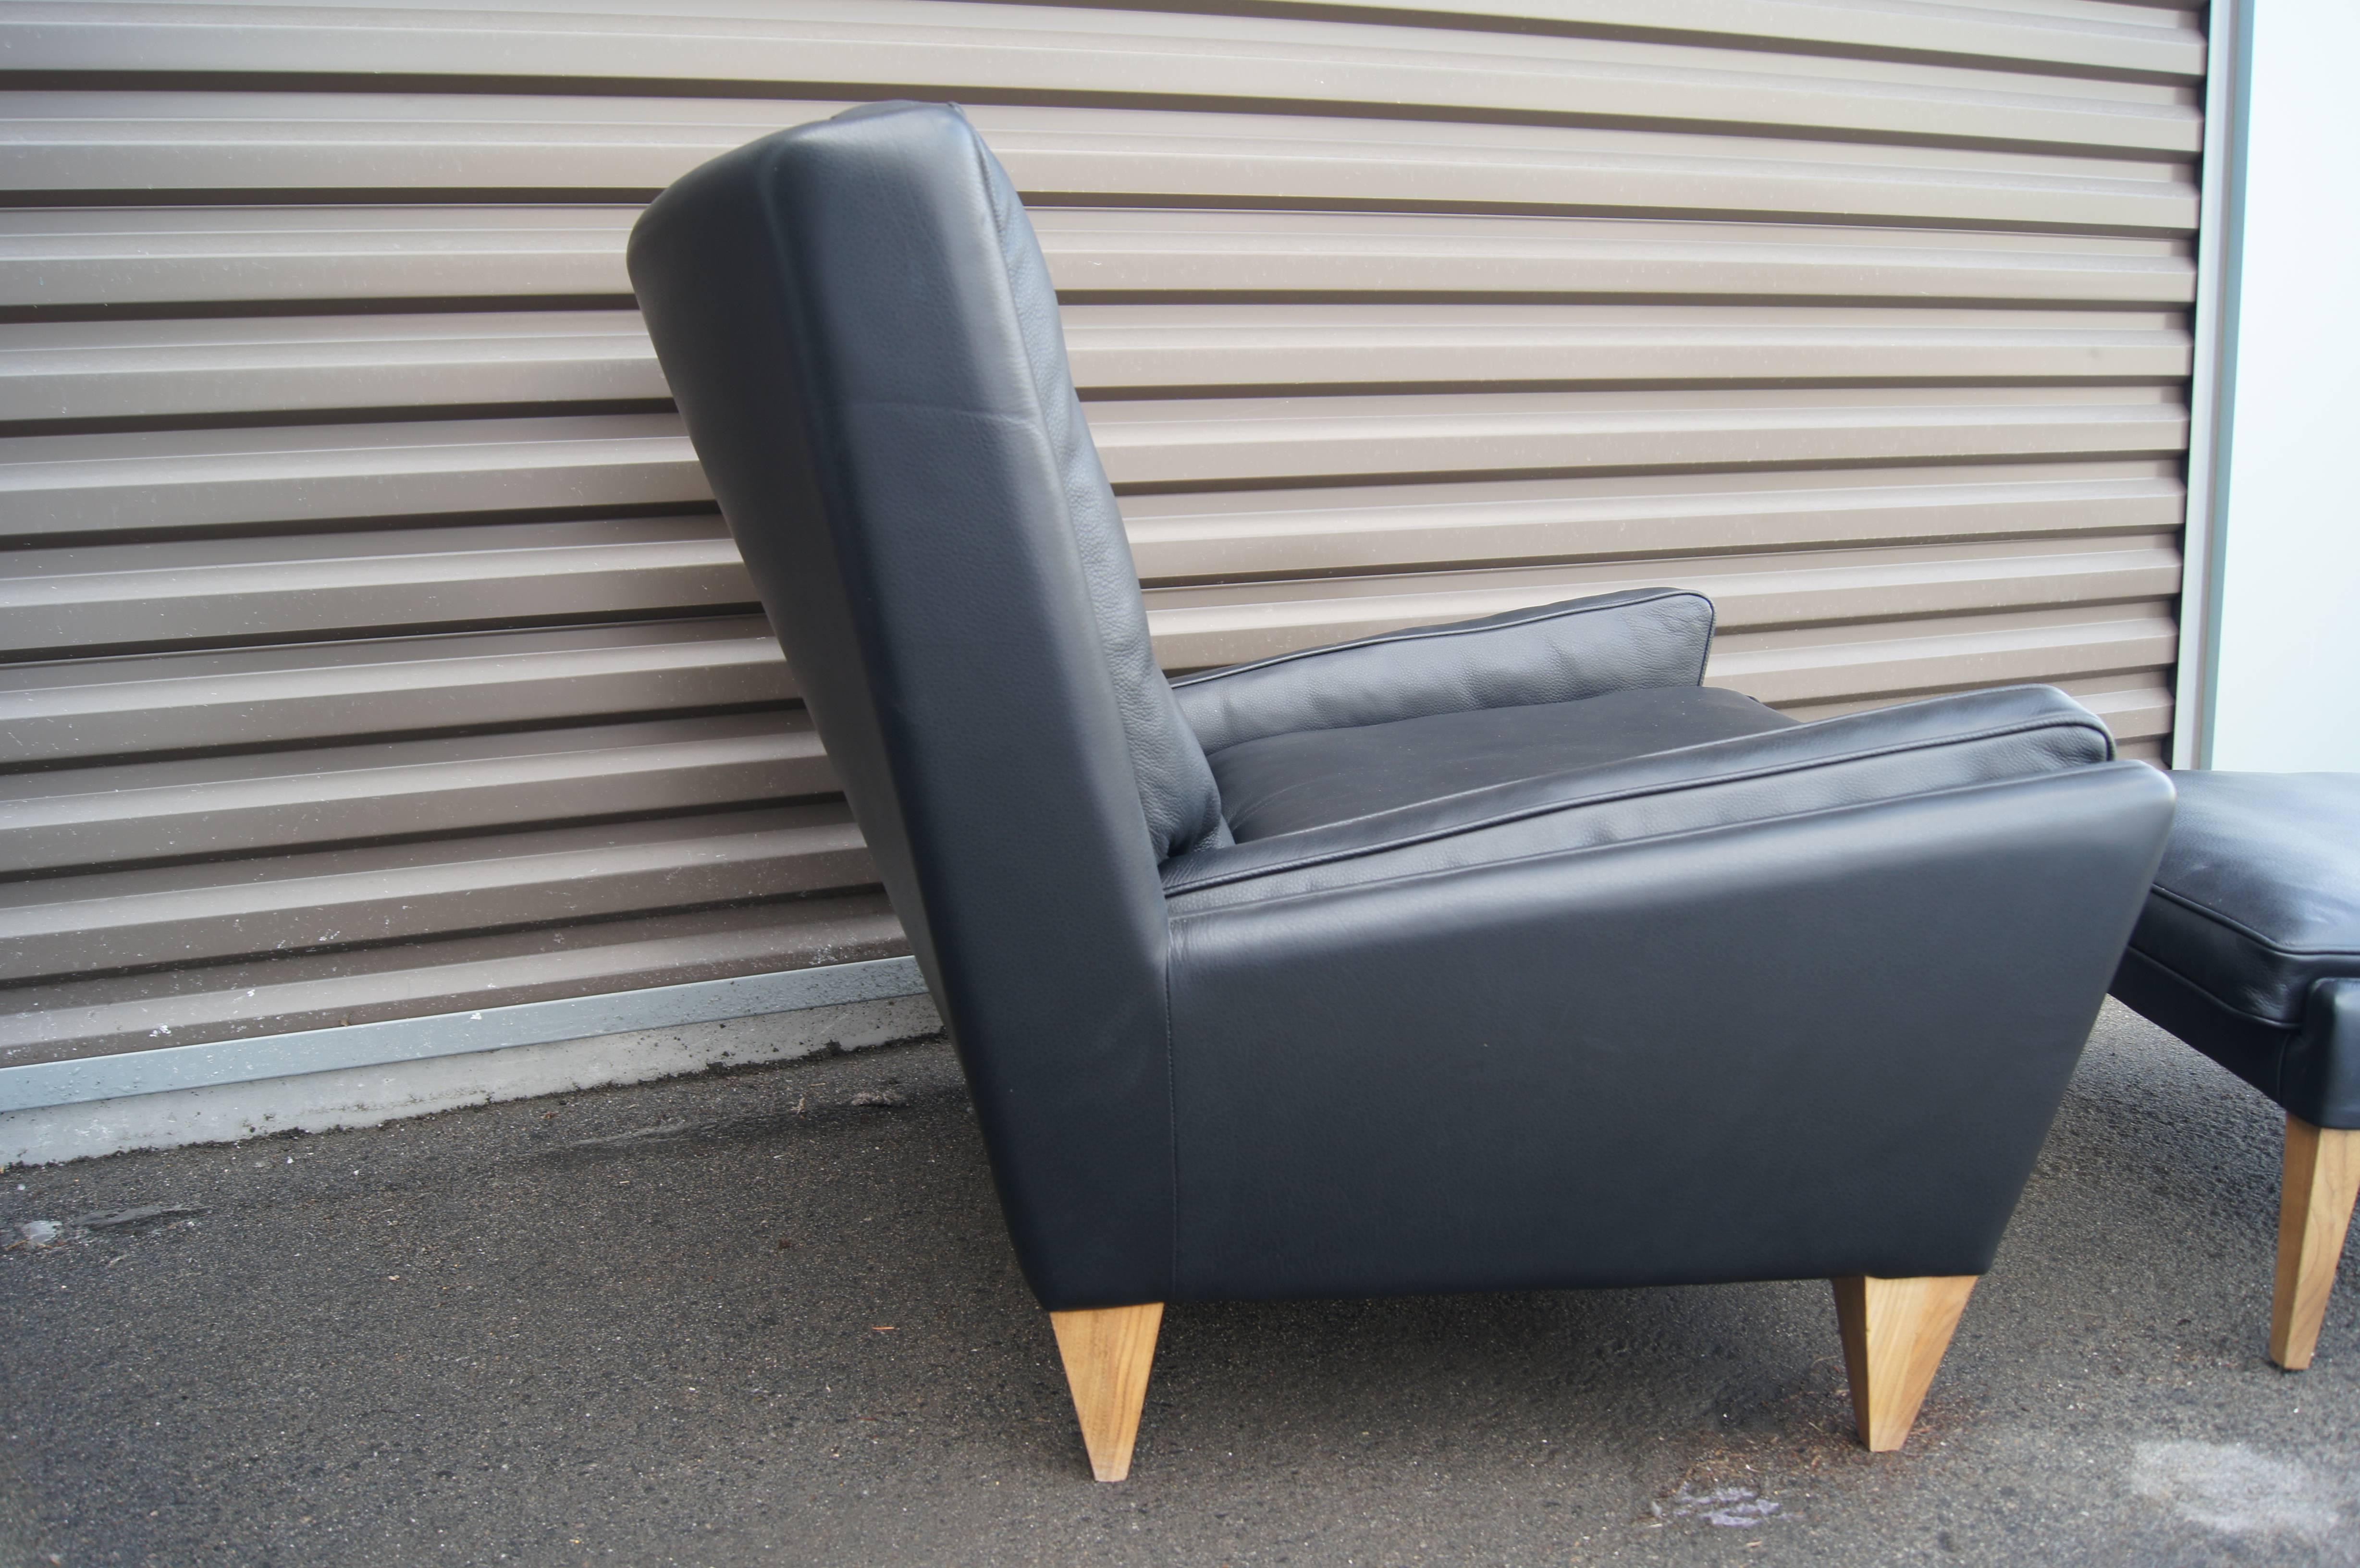 Mid-20th Century Black Leather Lounge Chair and Ottoman, Model V11, by Illum Wikkelsø